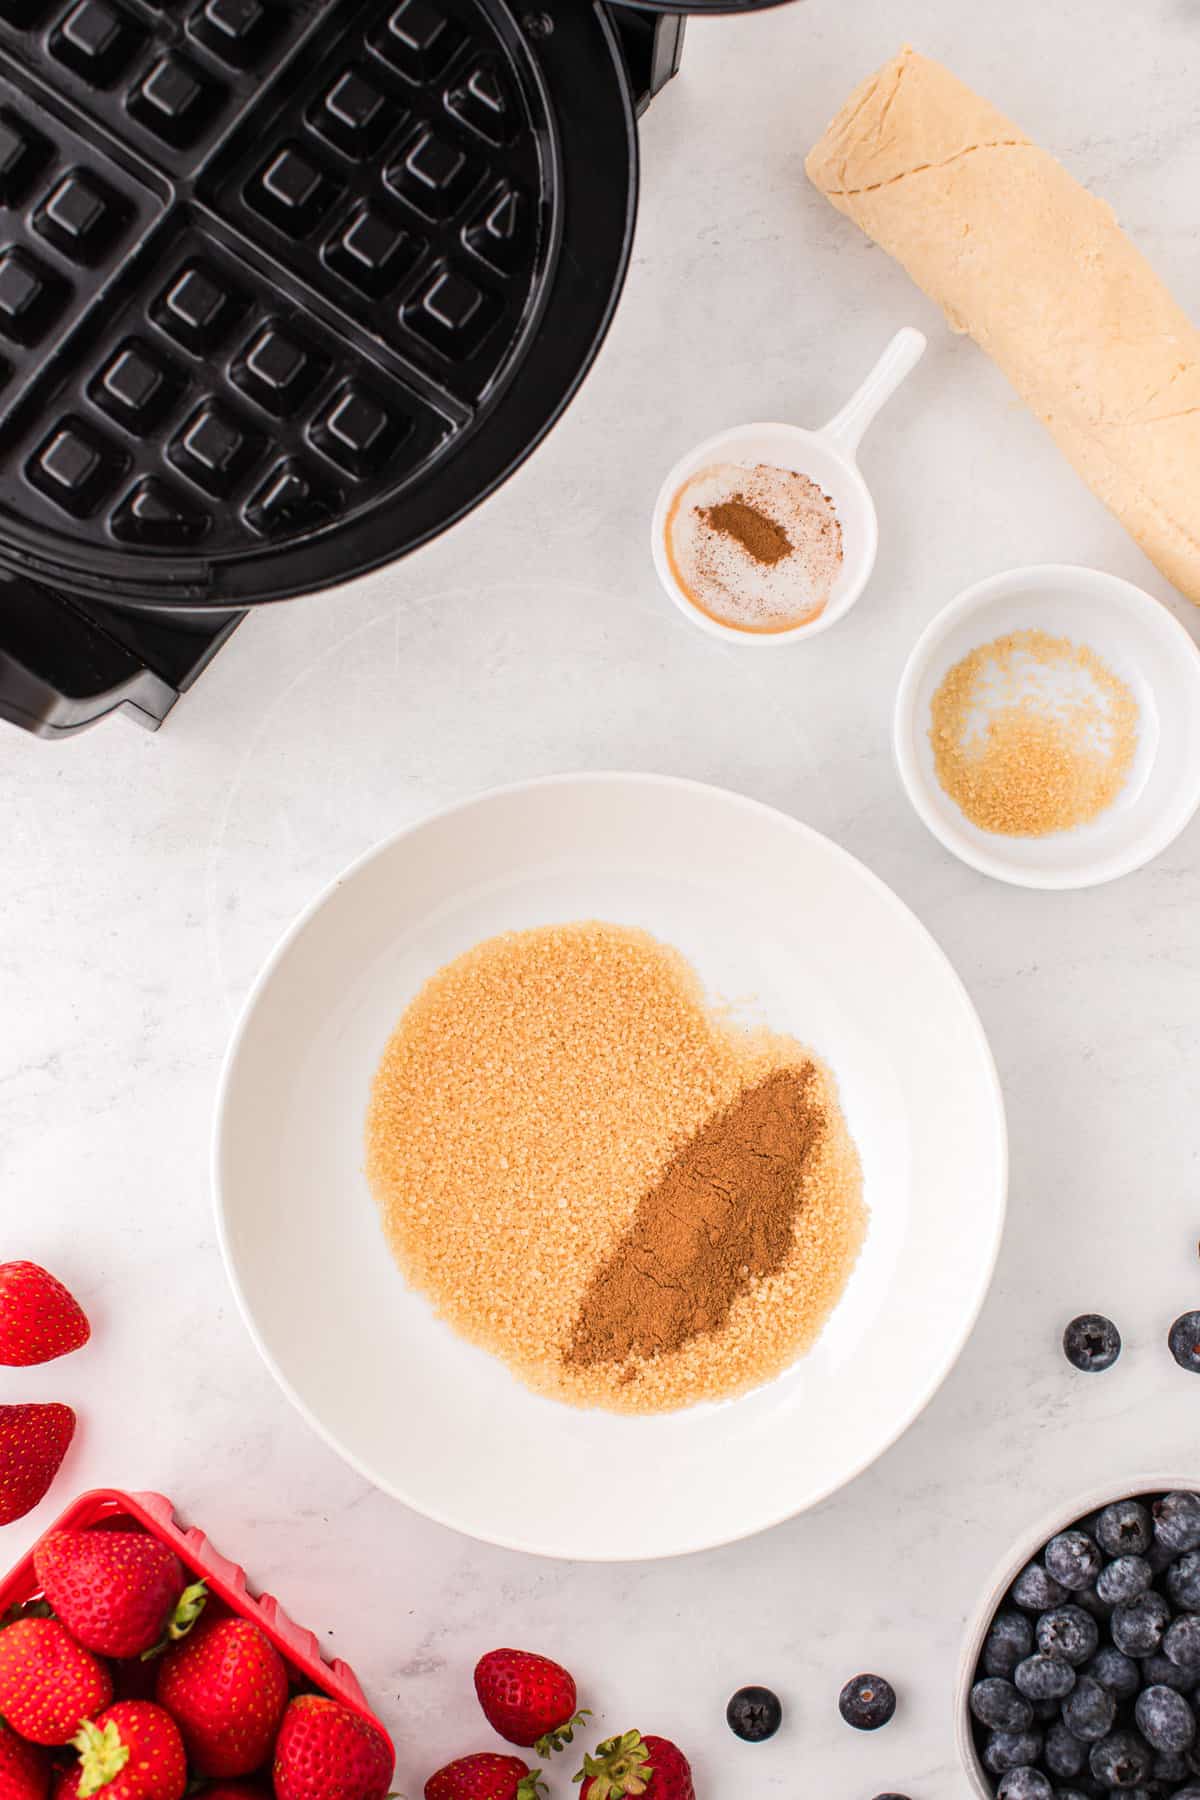 In a Small Bowl mix together the Cinnamon and Sugar. Set aside.